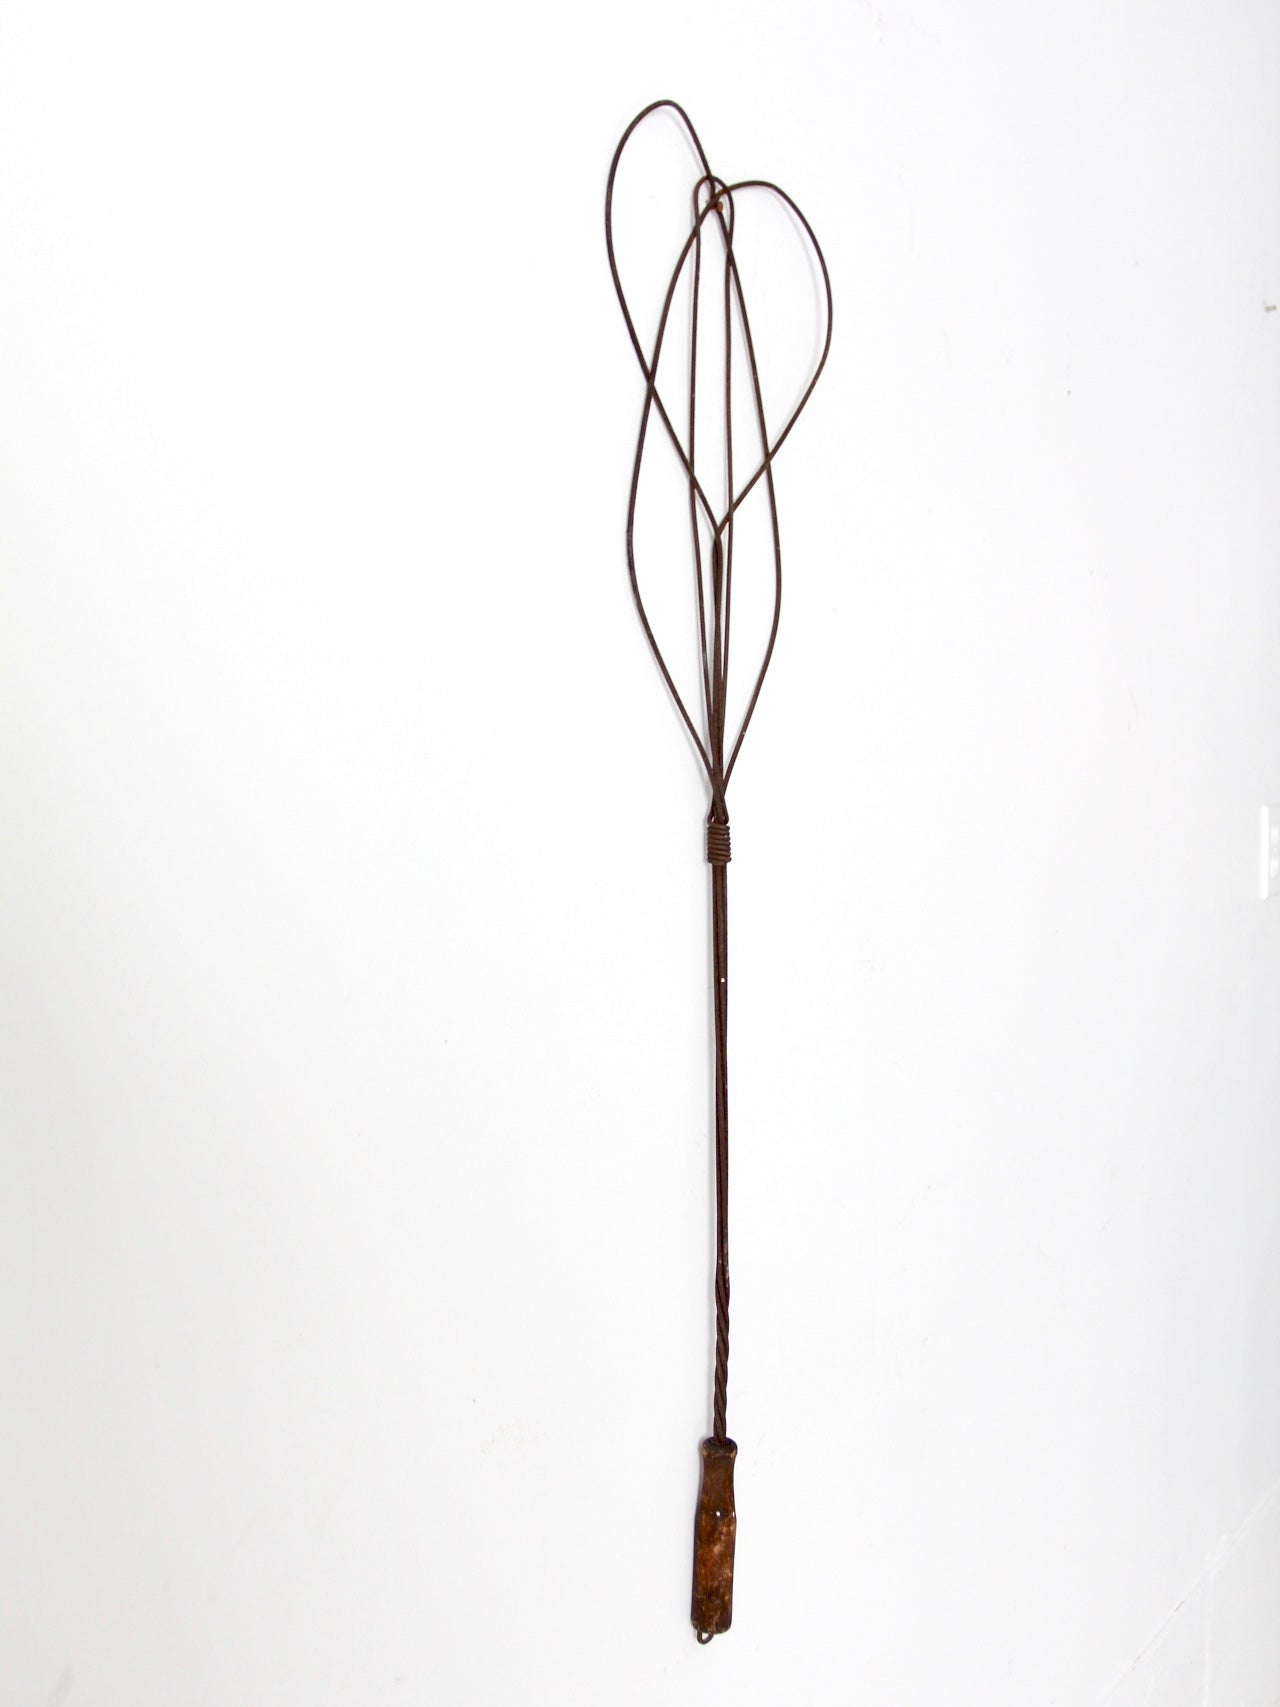 Antique wire rug beater with wood handle - Northern Kentucky